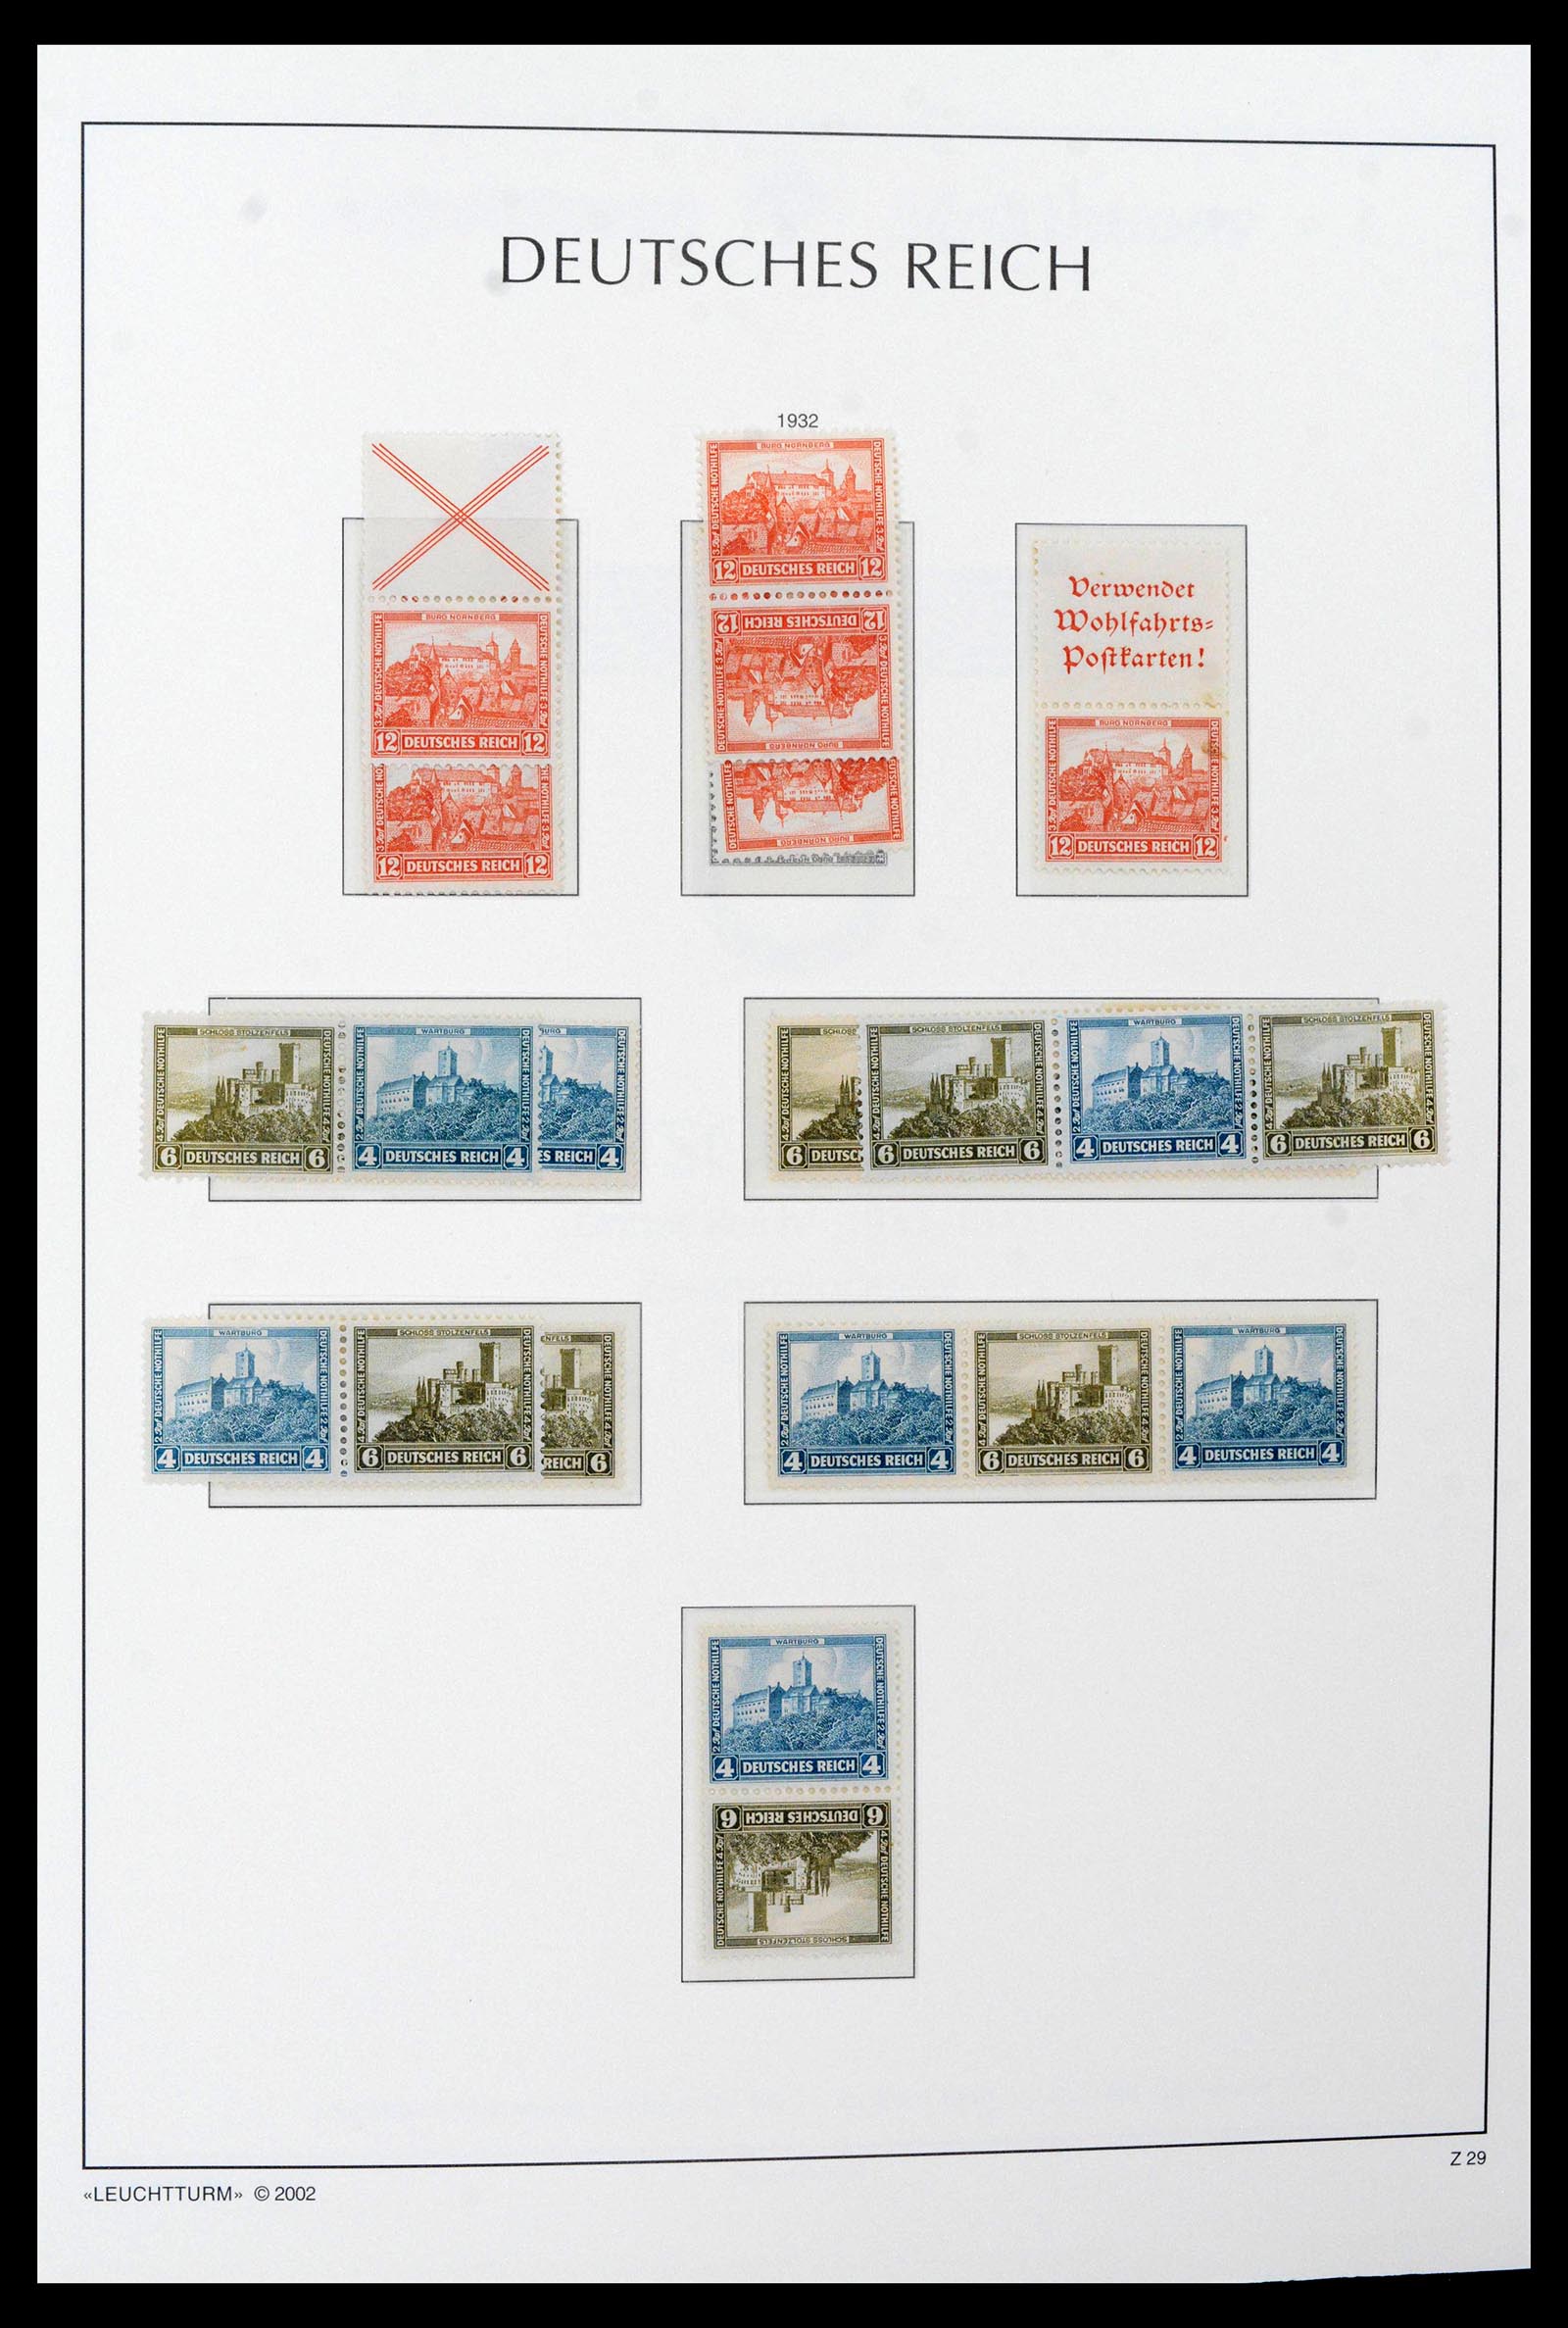 39045 0032 - Stamp collection 39045 German Reich combinations 1913-1941.